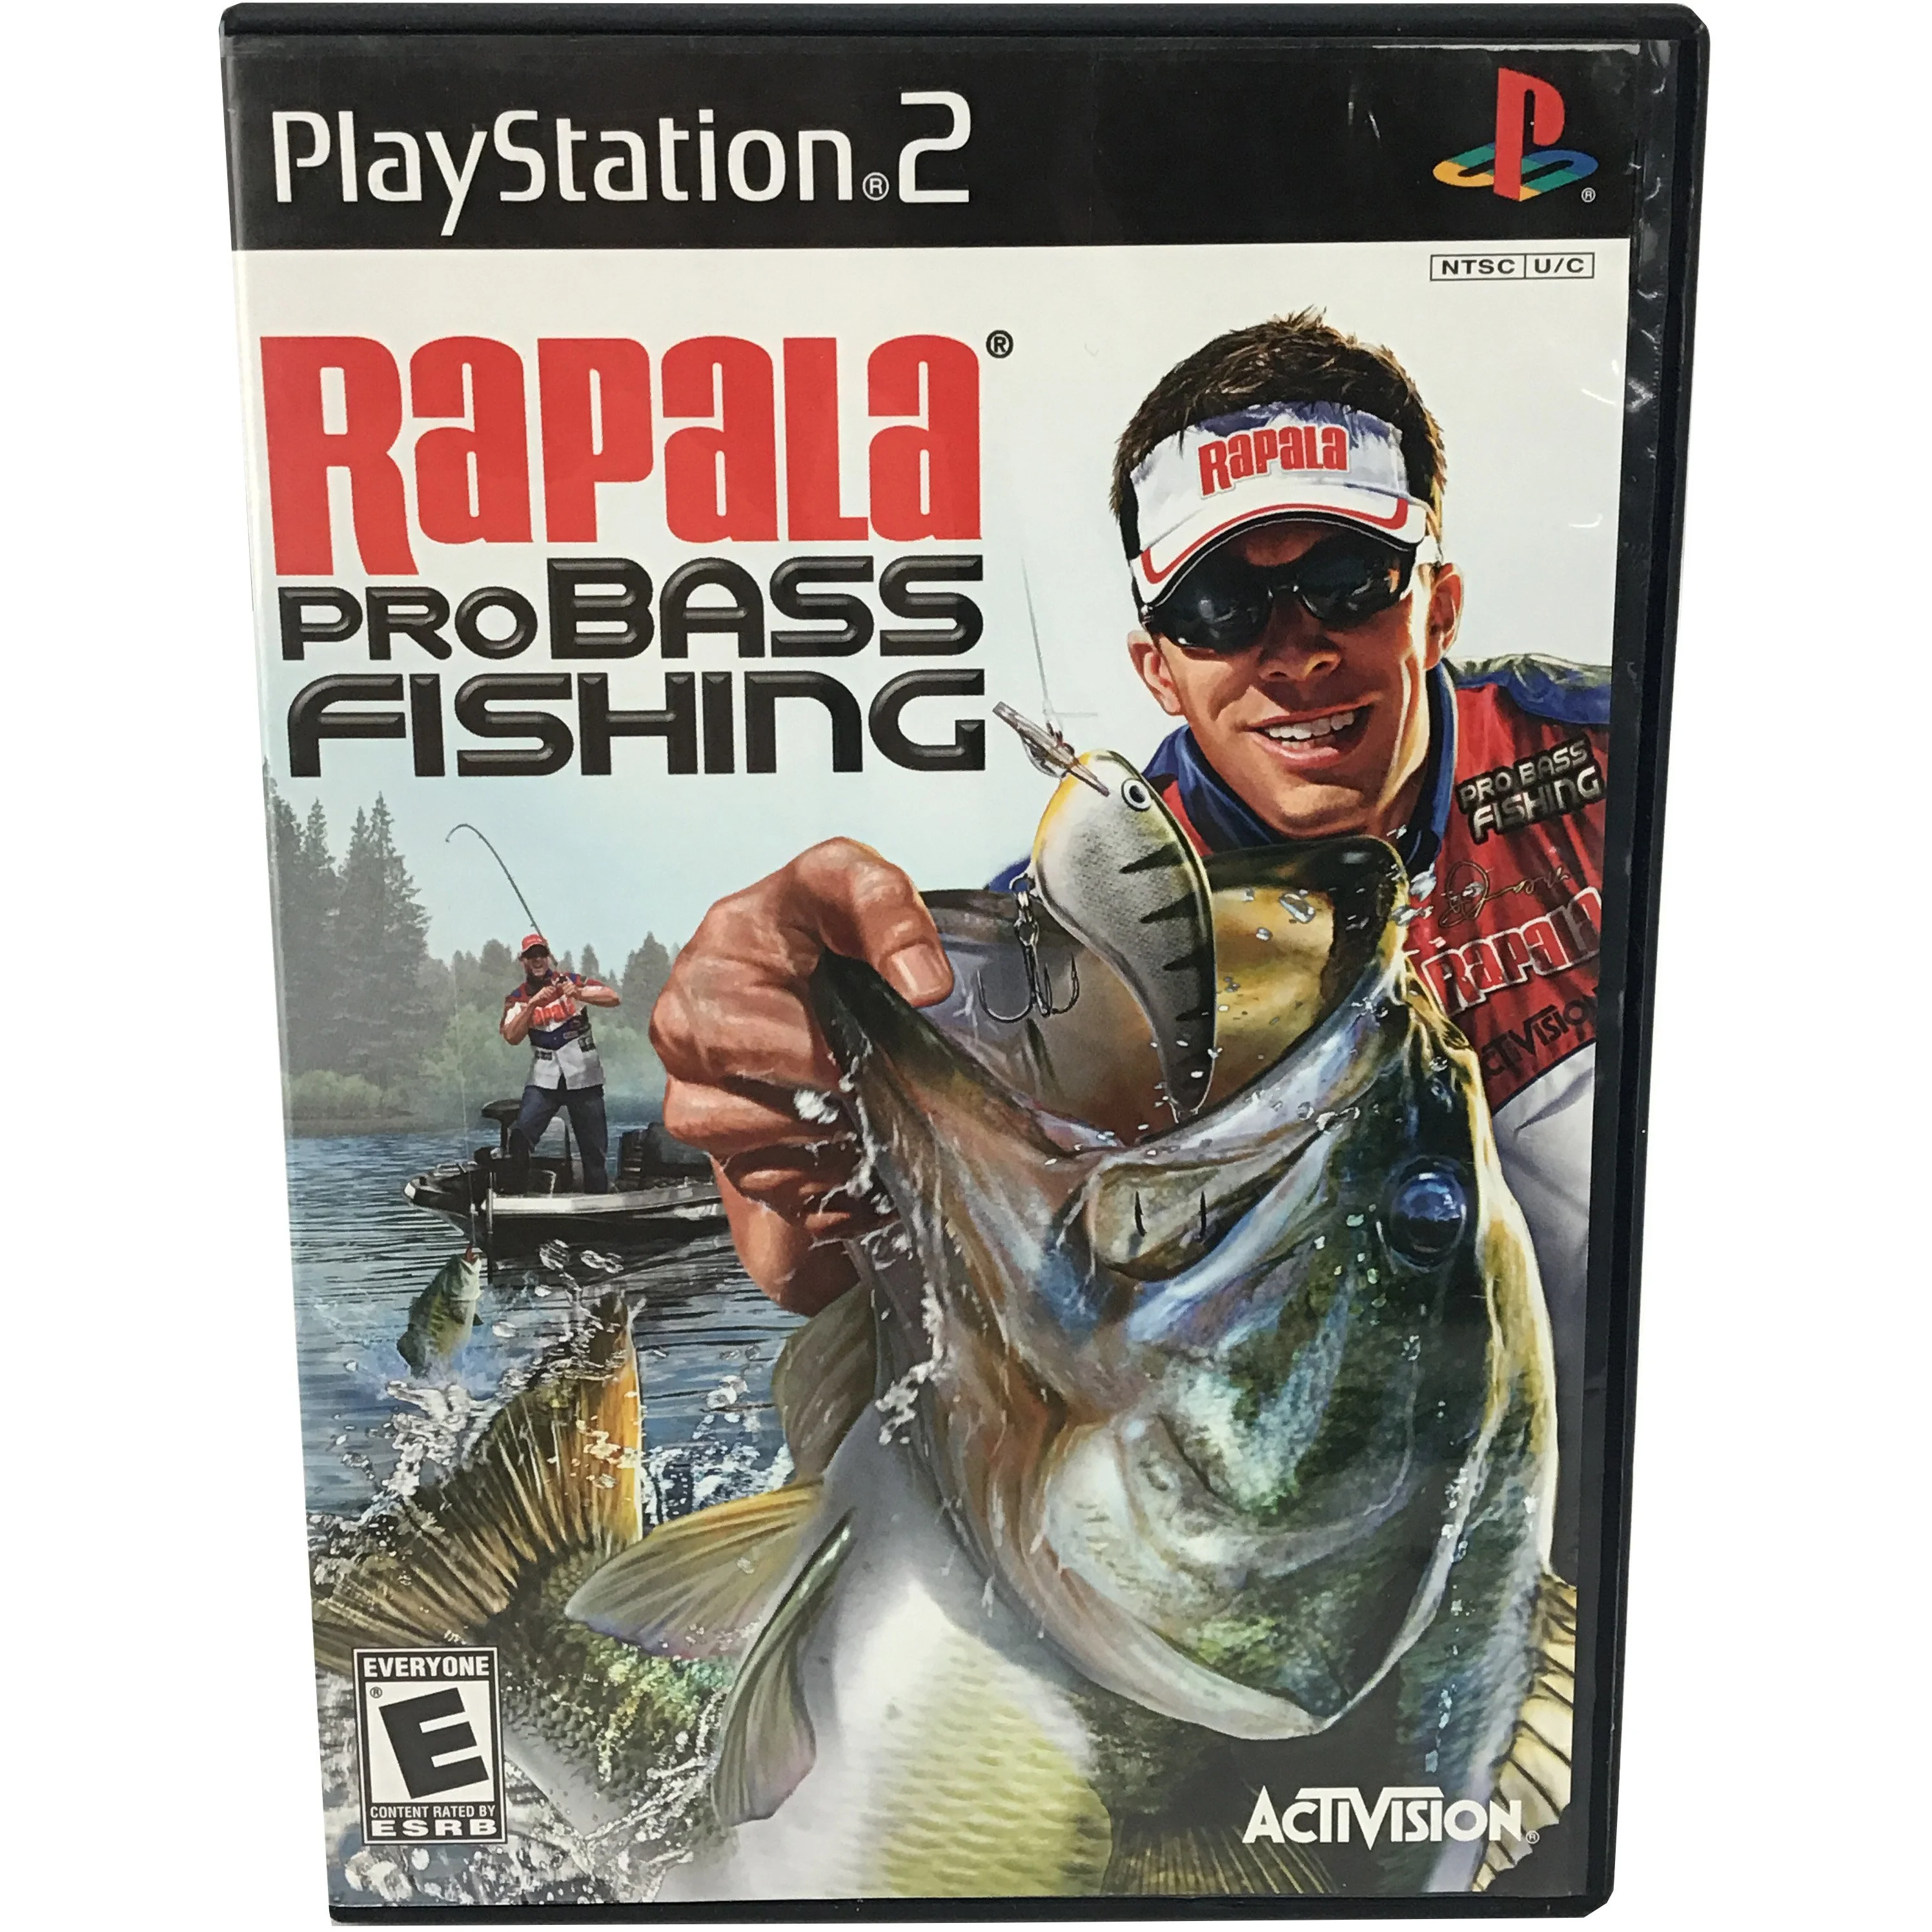 Play Station 2: Rapala ProBass Fishing Game / Video Game **USED**